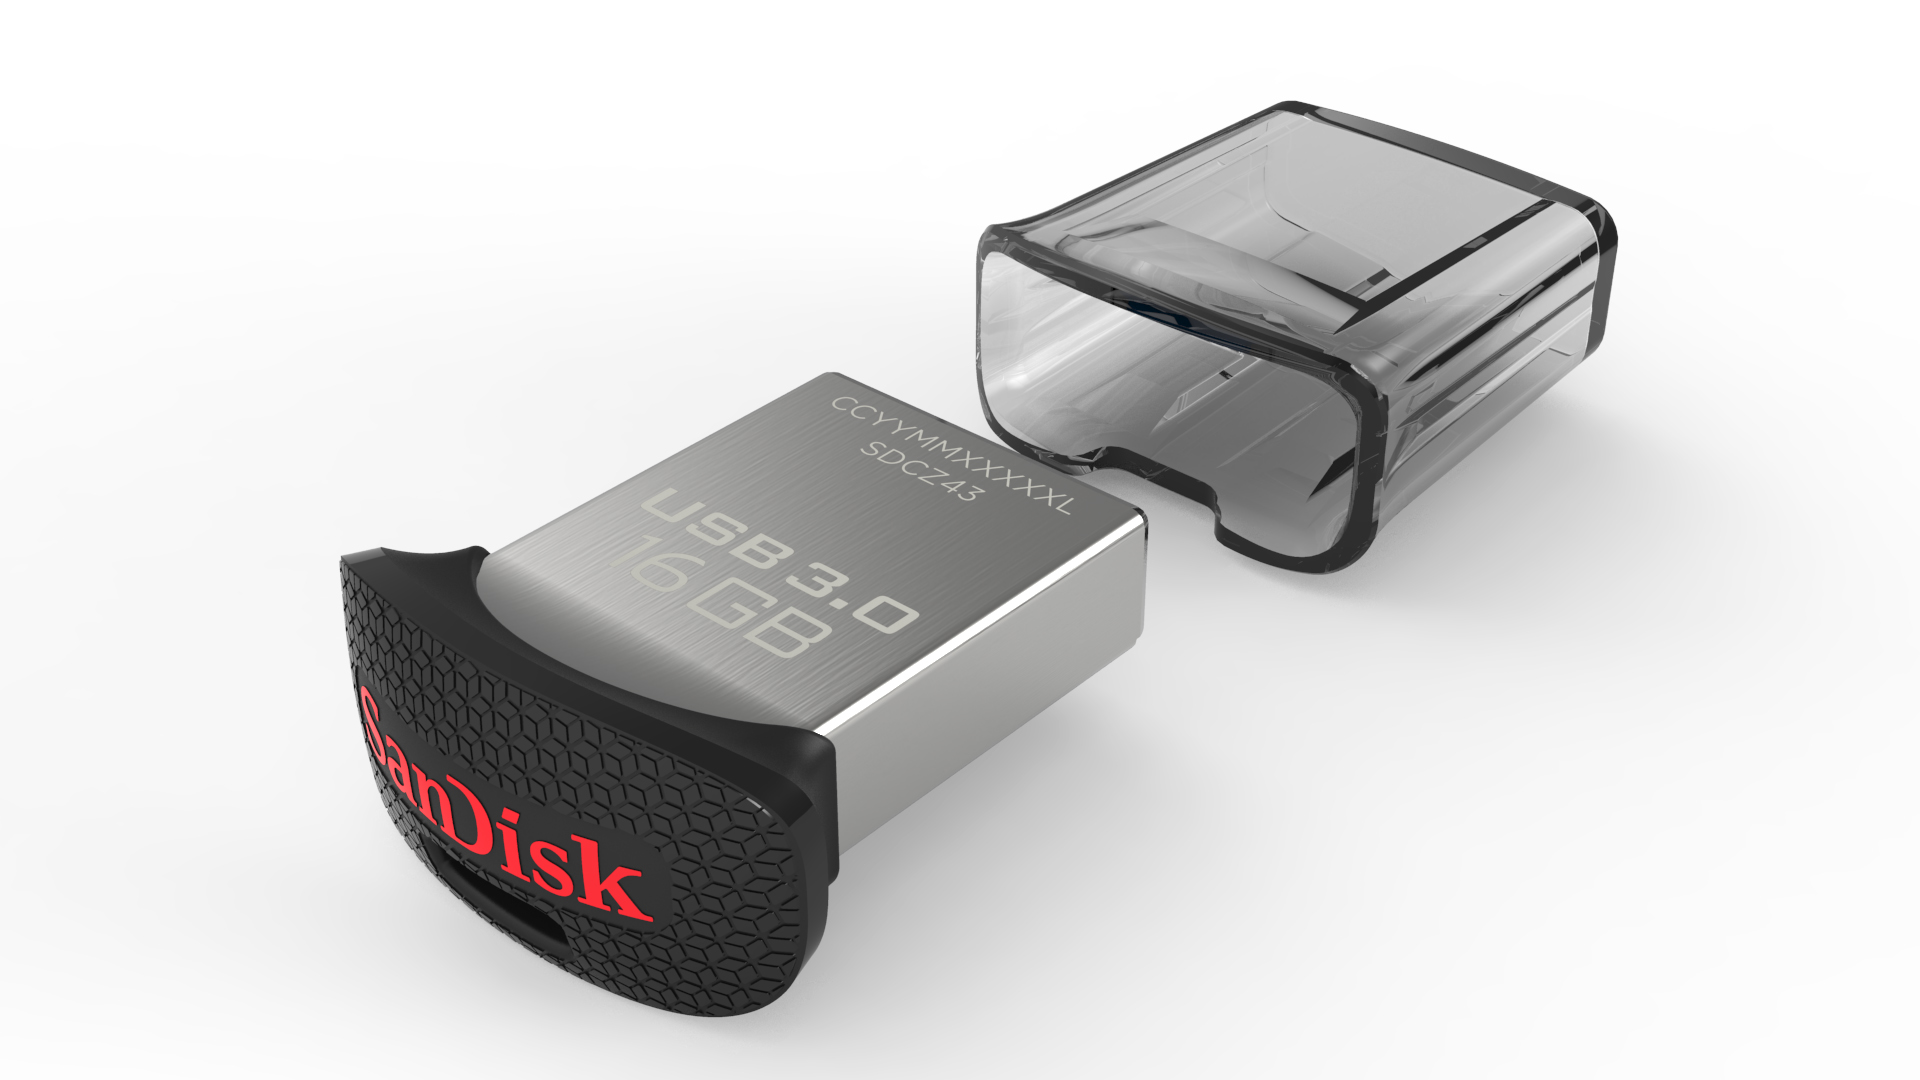 SanDisk 16GB Ultra Fit™ USB 3.0 Flash Drive - SDCZ43-016G-A46 - image 1 of 4